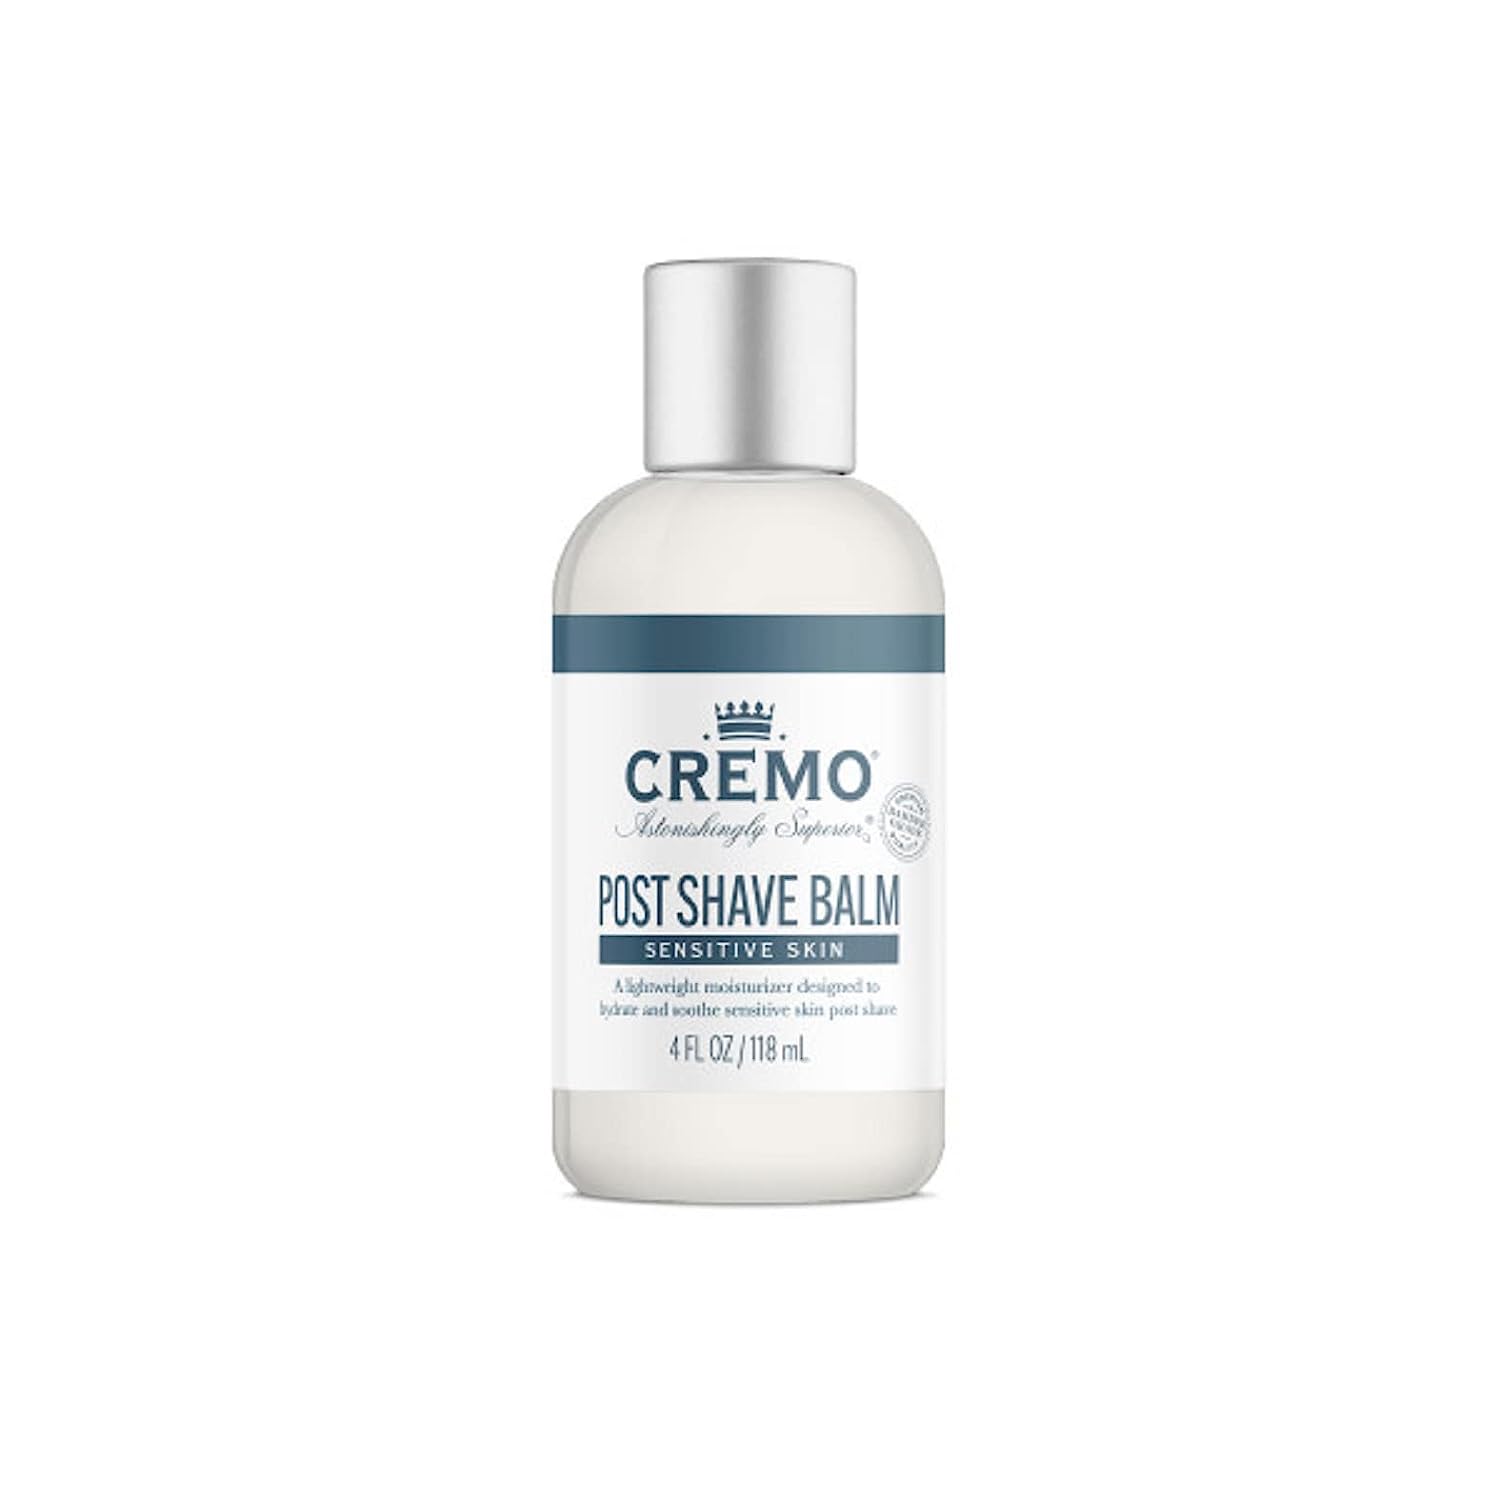 Cremo Sensitive Post Shave Balm, Soothes, And Protects Skin From Shaving Irritation, Dryness and Razor Burn, 4 Fluid Ounces